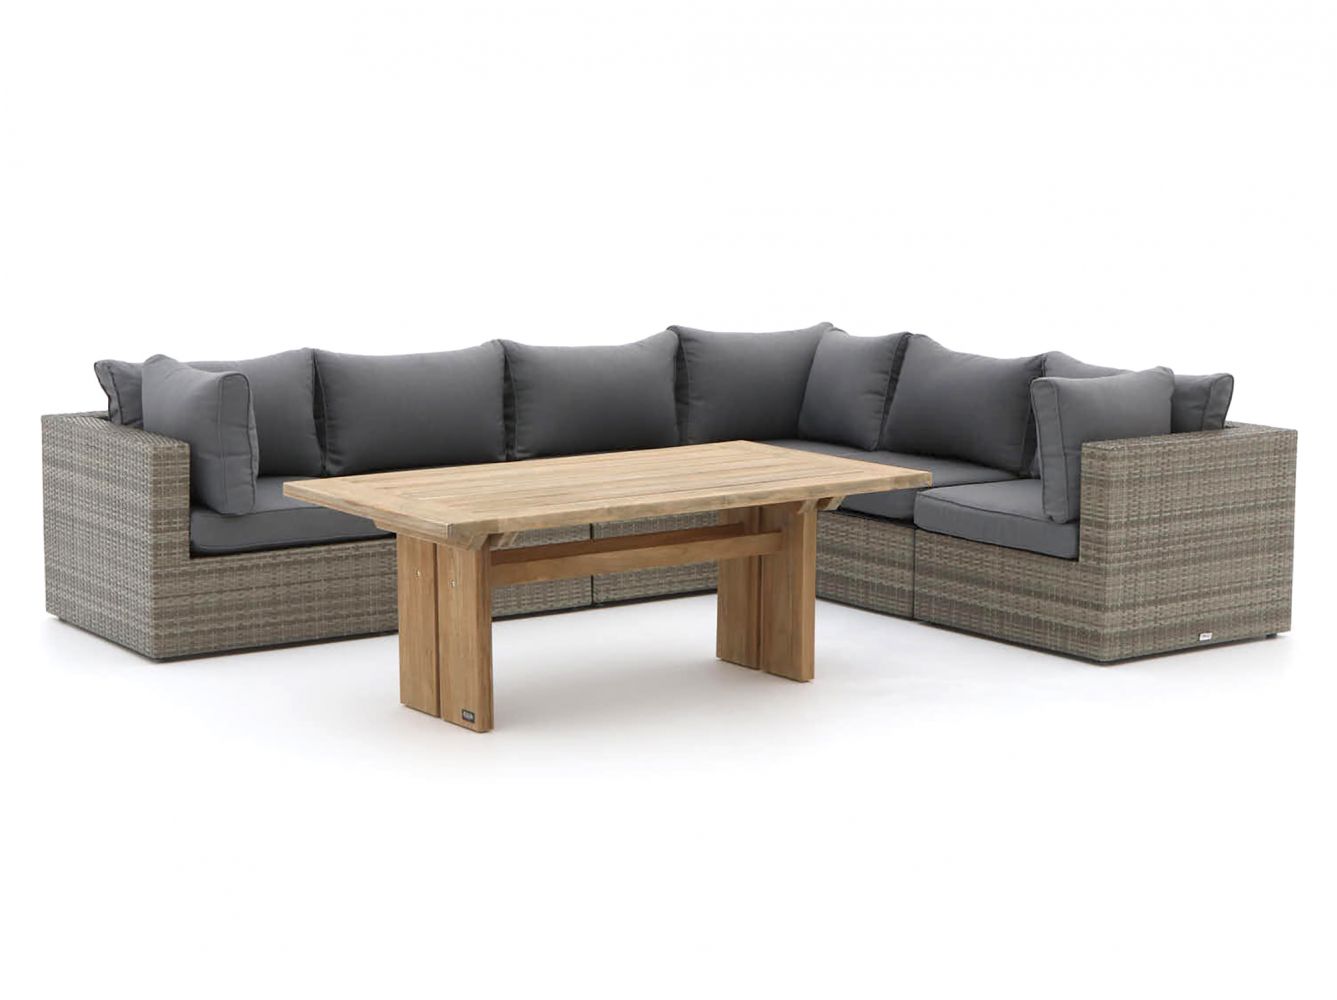 1a2d3ae0c69886e66aa60f4f99457e12e5322838 114688 p01 frtjlgxhincfsplx - Forza Barolo/ROUGH-L dining loungeset 7-delig